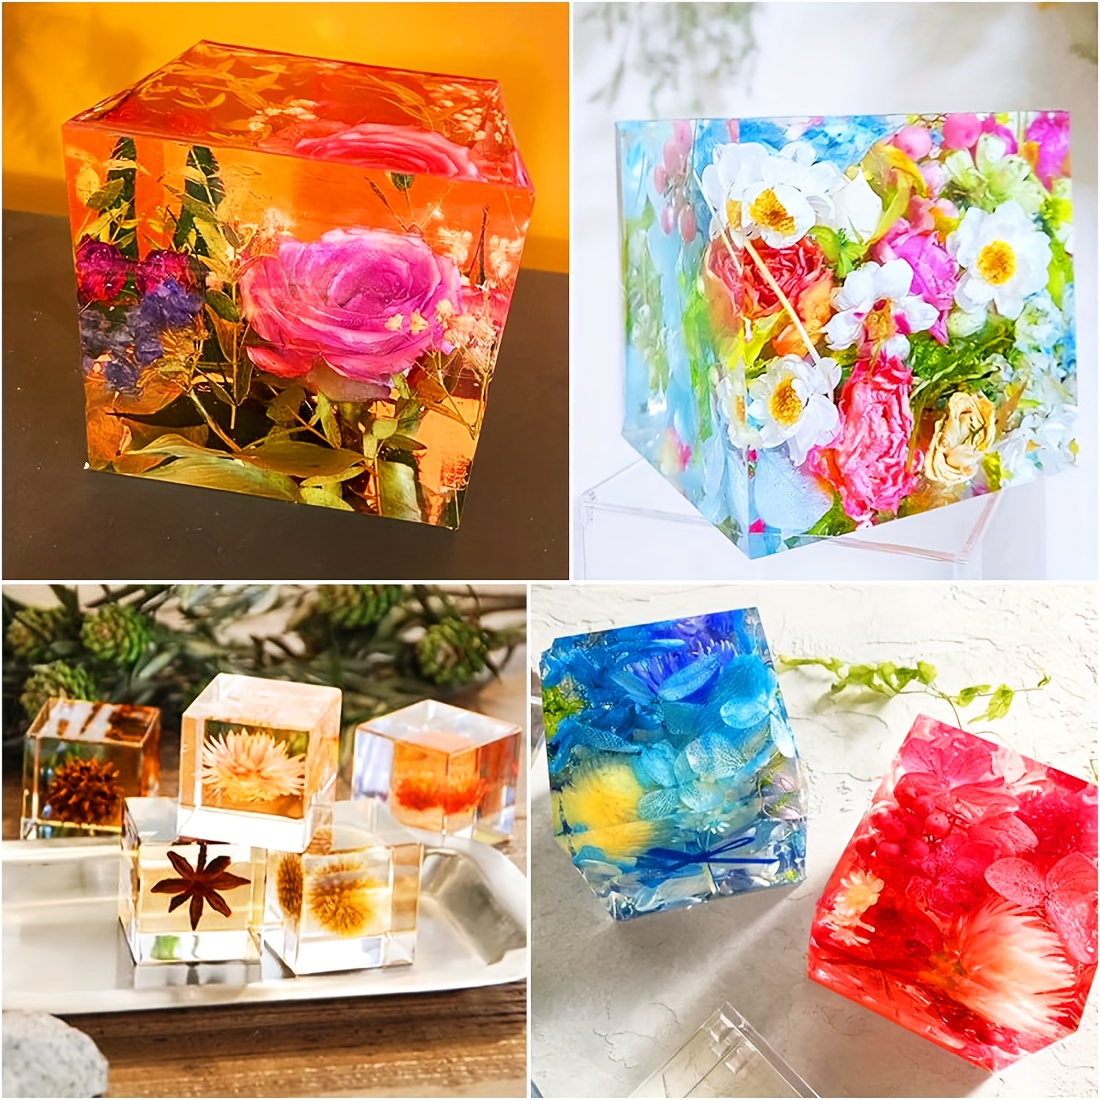 Best Deal for 10 Inch Large Square Cube Silicone Mold for Resin and Soap